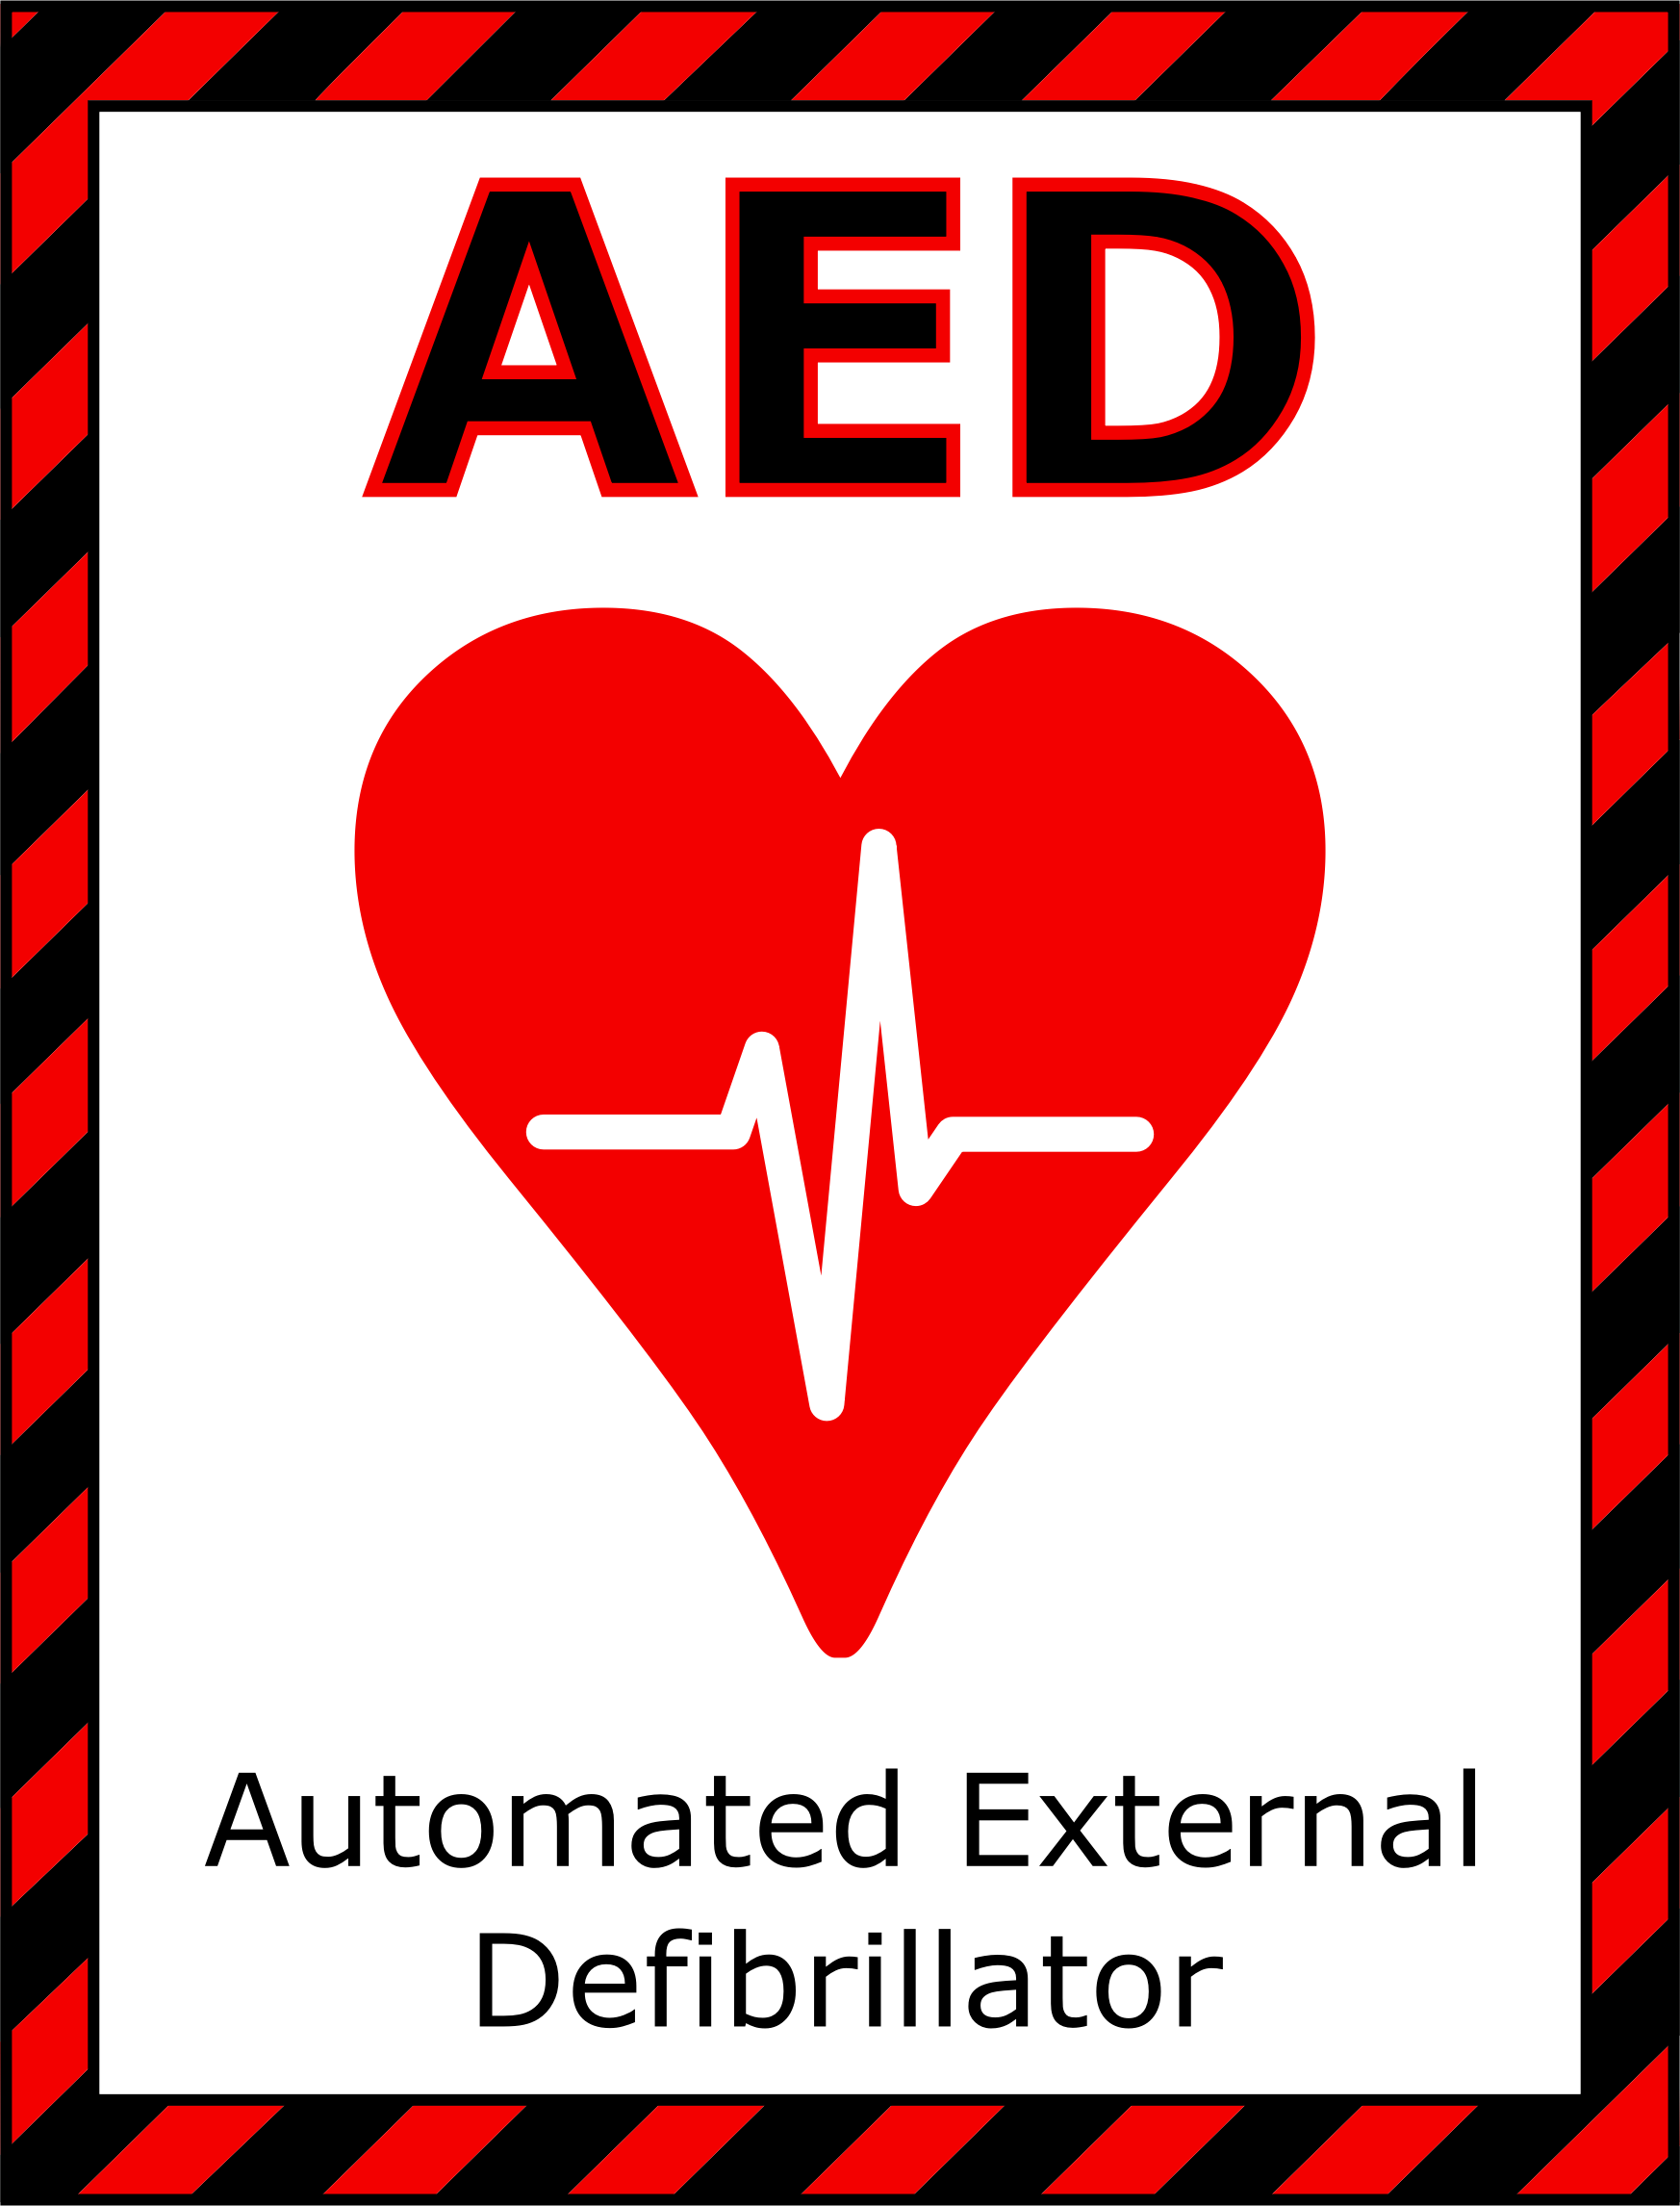 aed-logo-transparent-background-png-image-png-2939-free-png-images